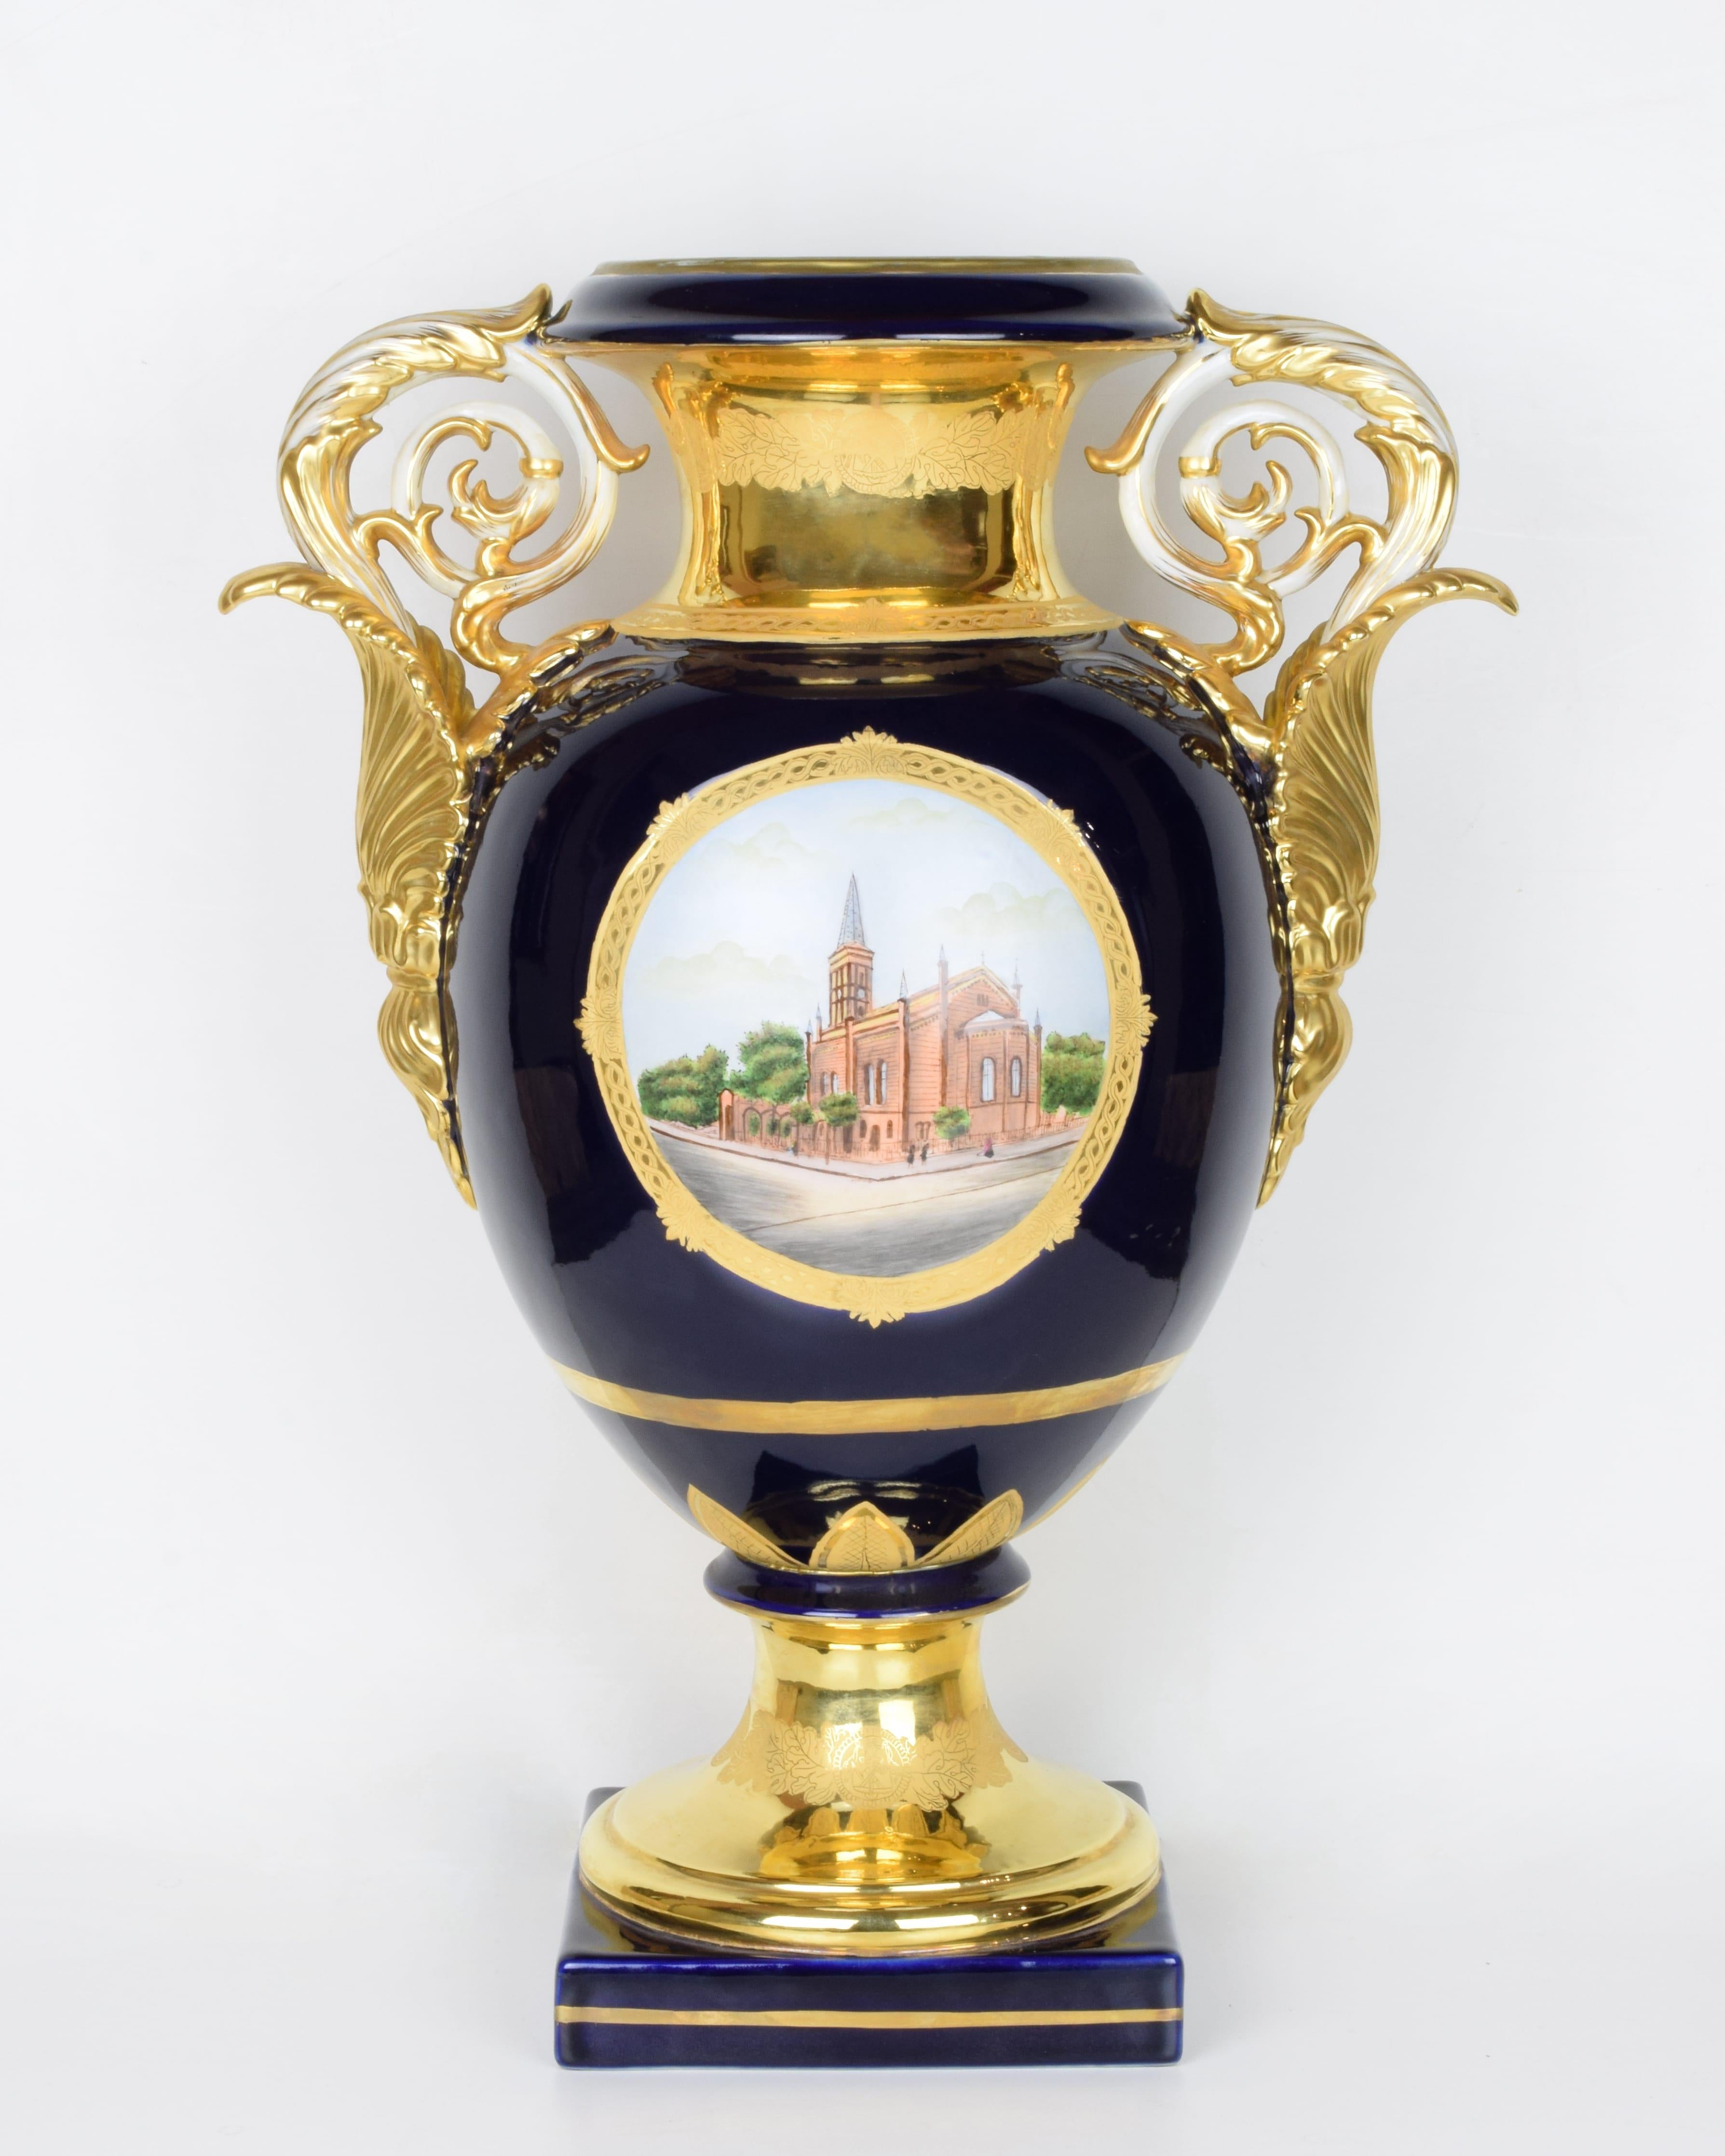 Germany, mid-20th century
In blue and gold painted porcelain
Dimensions cm W38 x D25 x H52 approx.